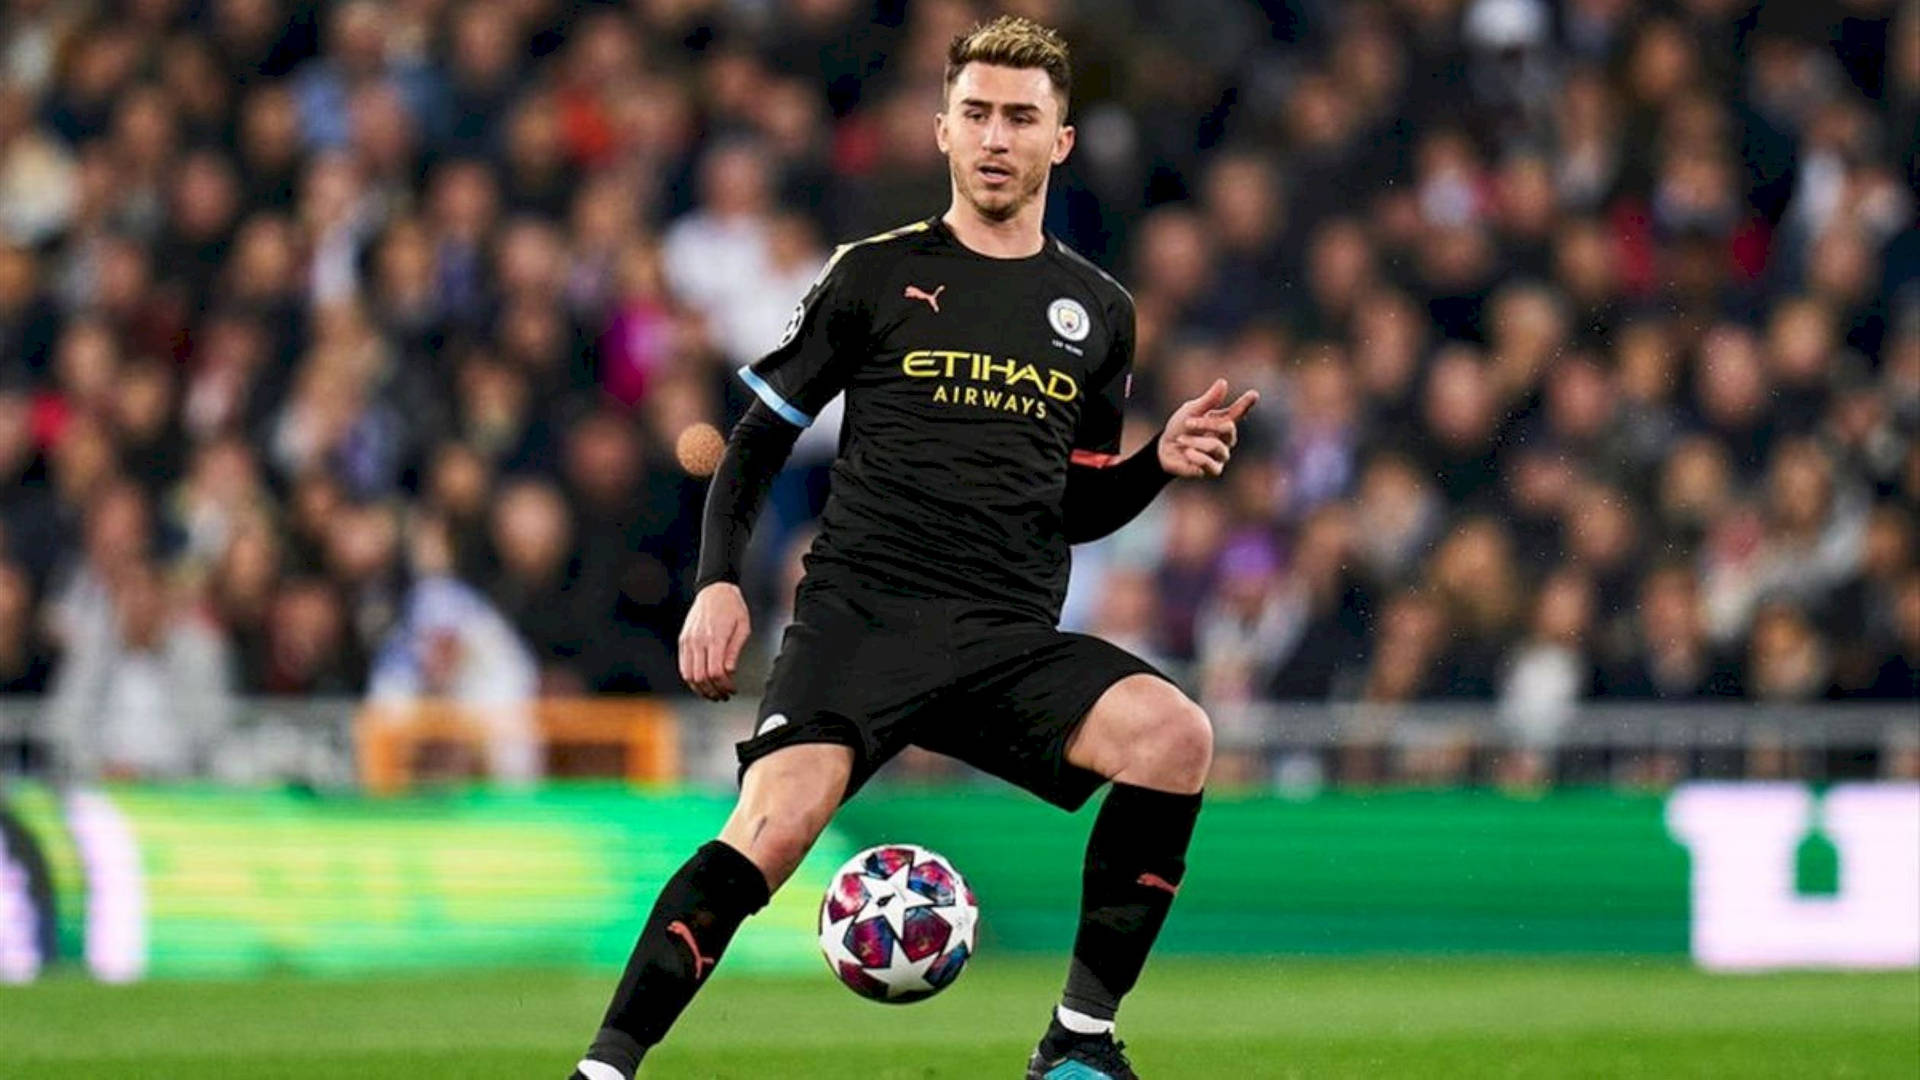 Aymeric Laporte With Football Between Legs Wallpaper